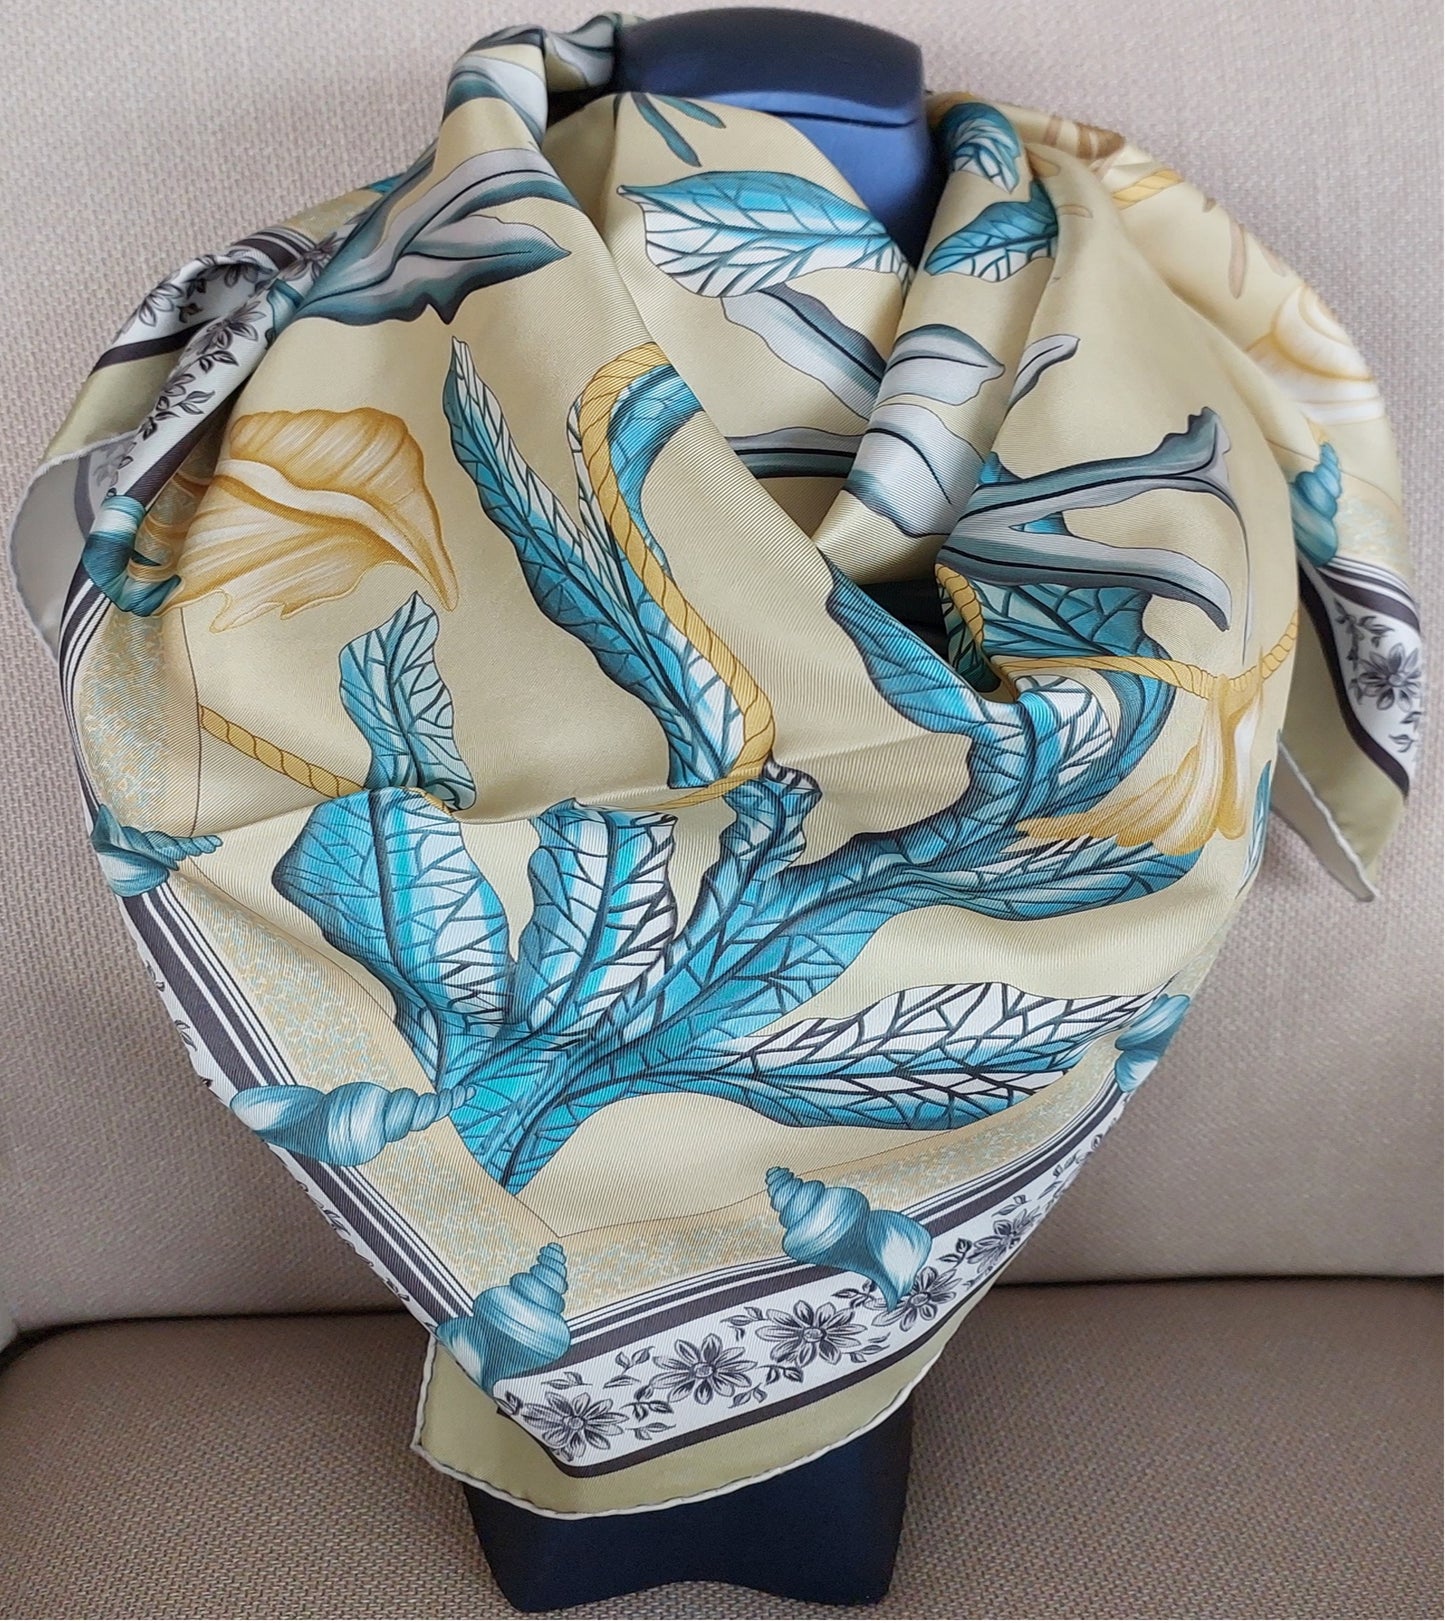 Woman Scarf 100% Silk Seashell design Light Green and Blue Colors Hand rolled Great Gift for Her